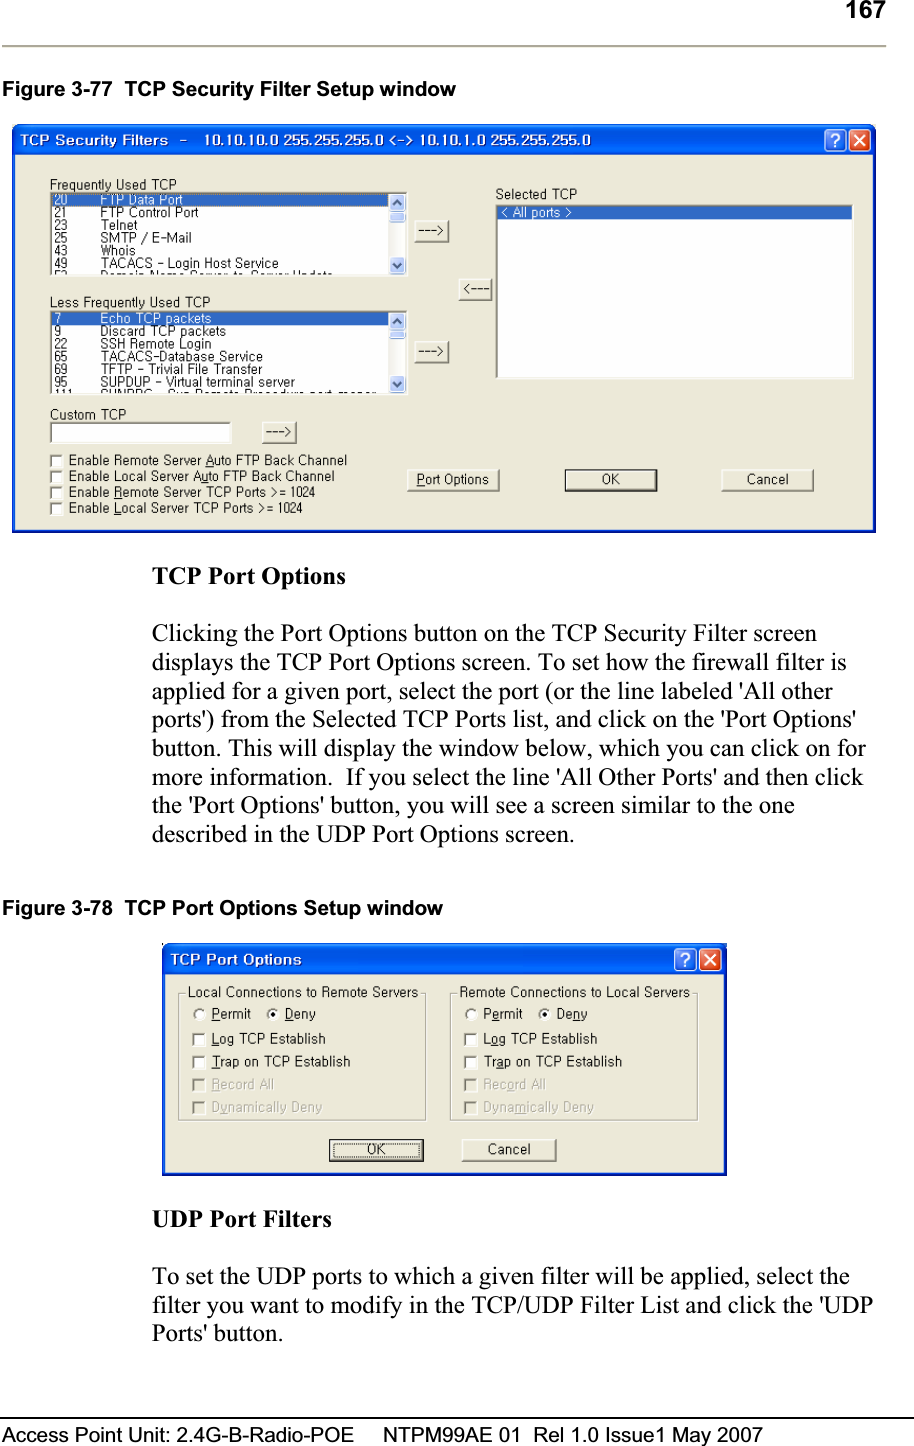 167Access Point Unit: 2.4G-B-Radio-POE     NTPM99AE 01  Rel 1.0 Issue1 May 2007 Figure 3-77  TCP Security Filter Setup window TCP Port Options  Clicking the Port Options button on the TCP Security Filter screen displays the TCP Port Options screen. To set how the firewall filter is applied for a given port, select the port (or the line labeled &apos;All other ports&apos;) from the Selected TCP Ports list, and click on the &apos;Port Options&apos; button. This will display the window below, which you can click on for more information.  If you select the line &apos;All Other Ports&apos; and then click the &apos;Port Options&apos; button, you will see a screen similar to the one described in the UDP Port Options screen. Figure 3-78  TCP Port Options Setup window UDP Port FiltersTo set the UDP ports to which a given filter will be applied, select the filter you want to modify in the TCP/UDP Filter List and click the &apos;UDP Ports&apos; button.  